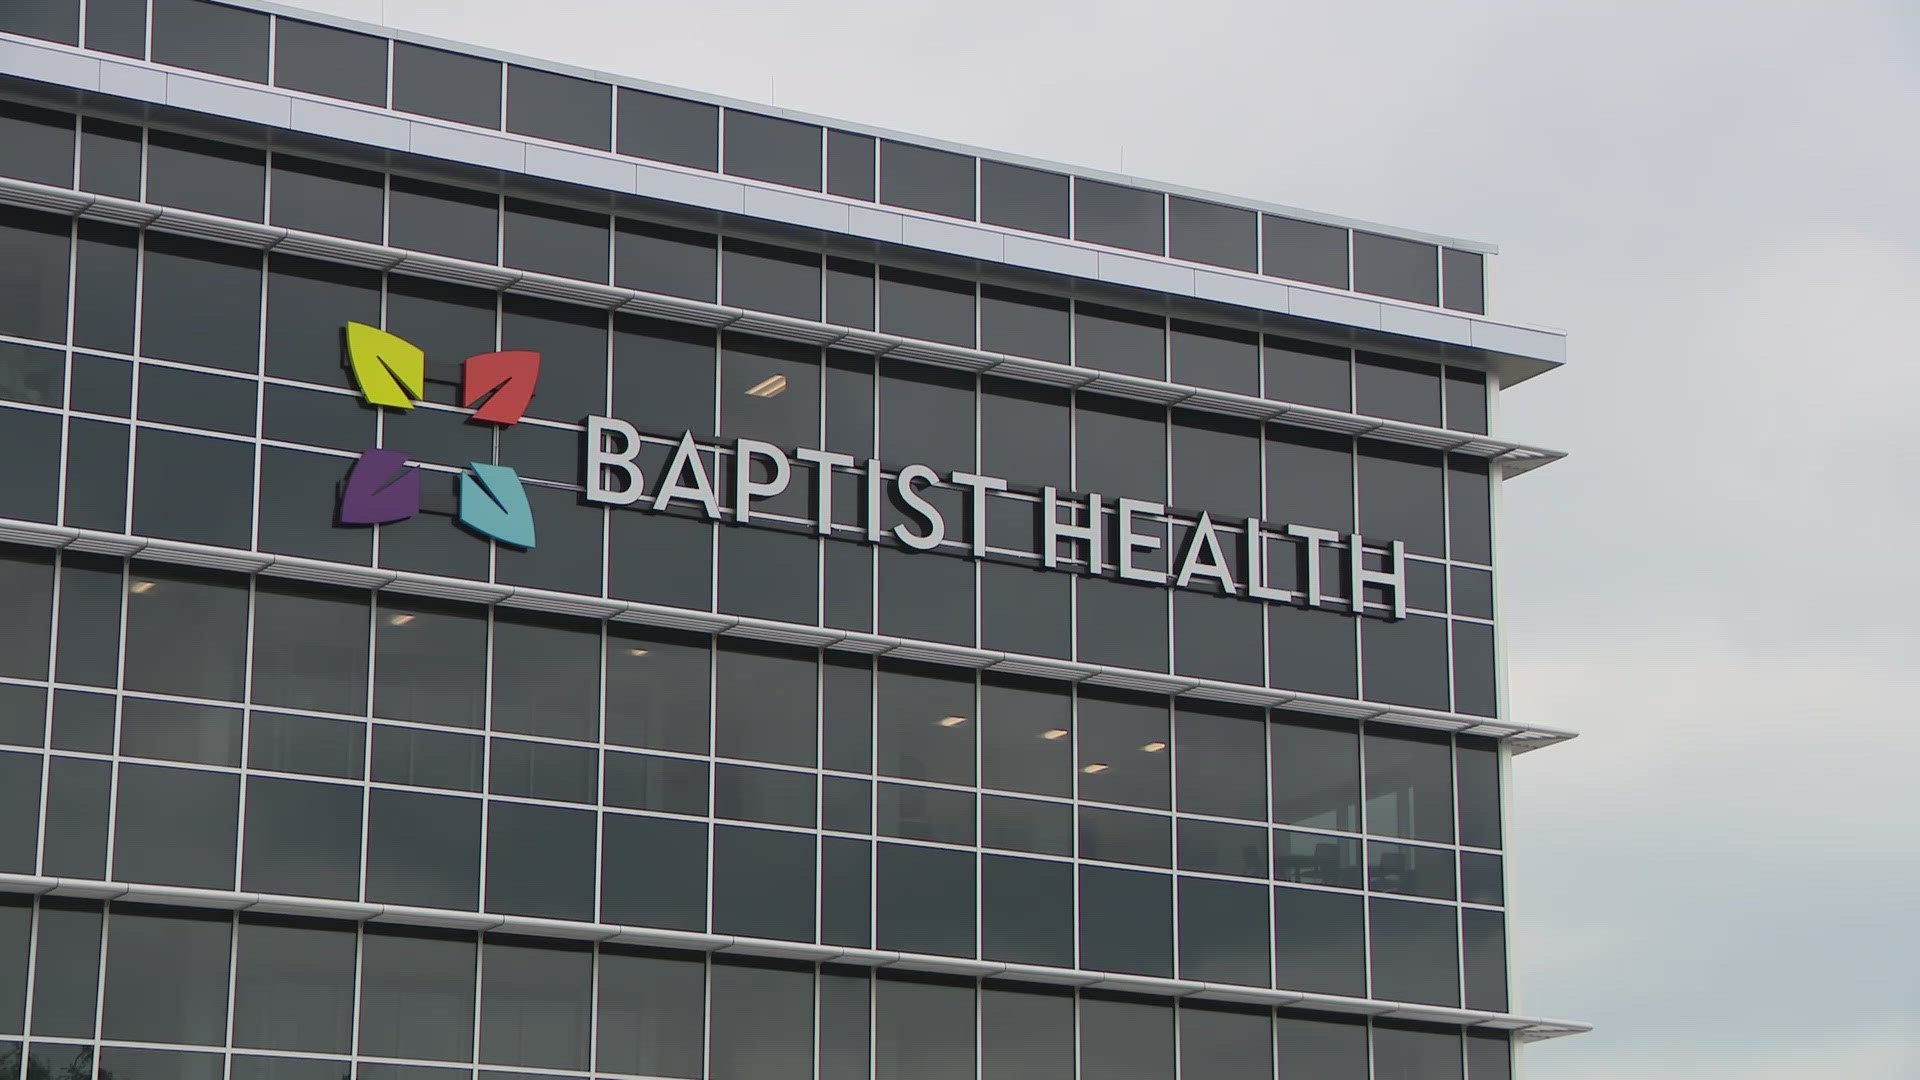 Baptist Health Breckenridge will be home to physician practices, an outpatient surgery center, urgent care center, a community pharmacy and more.